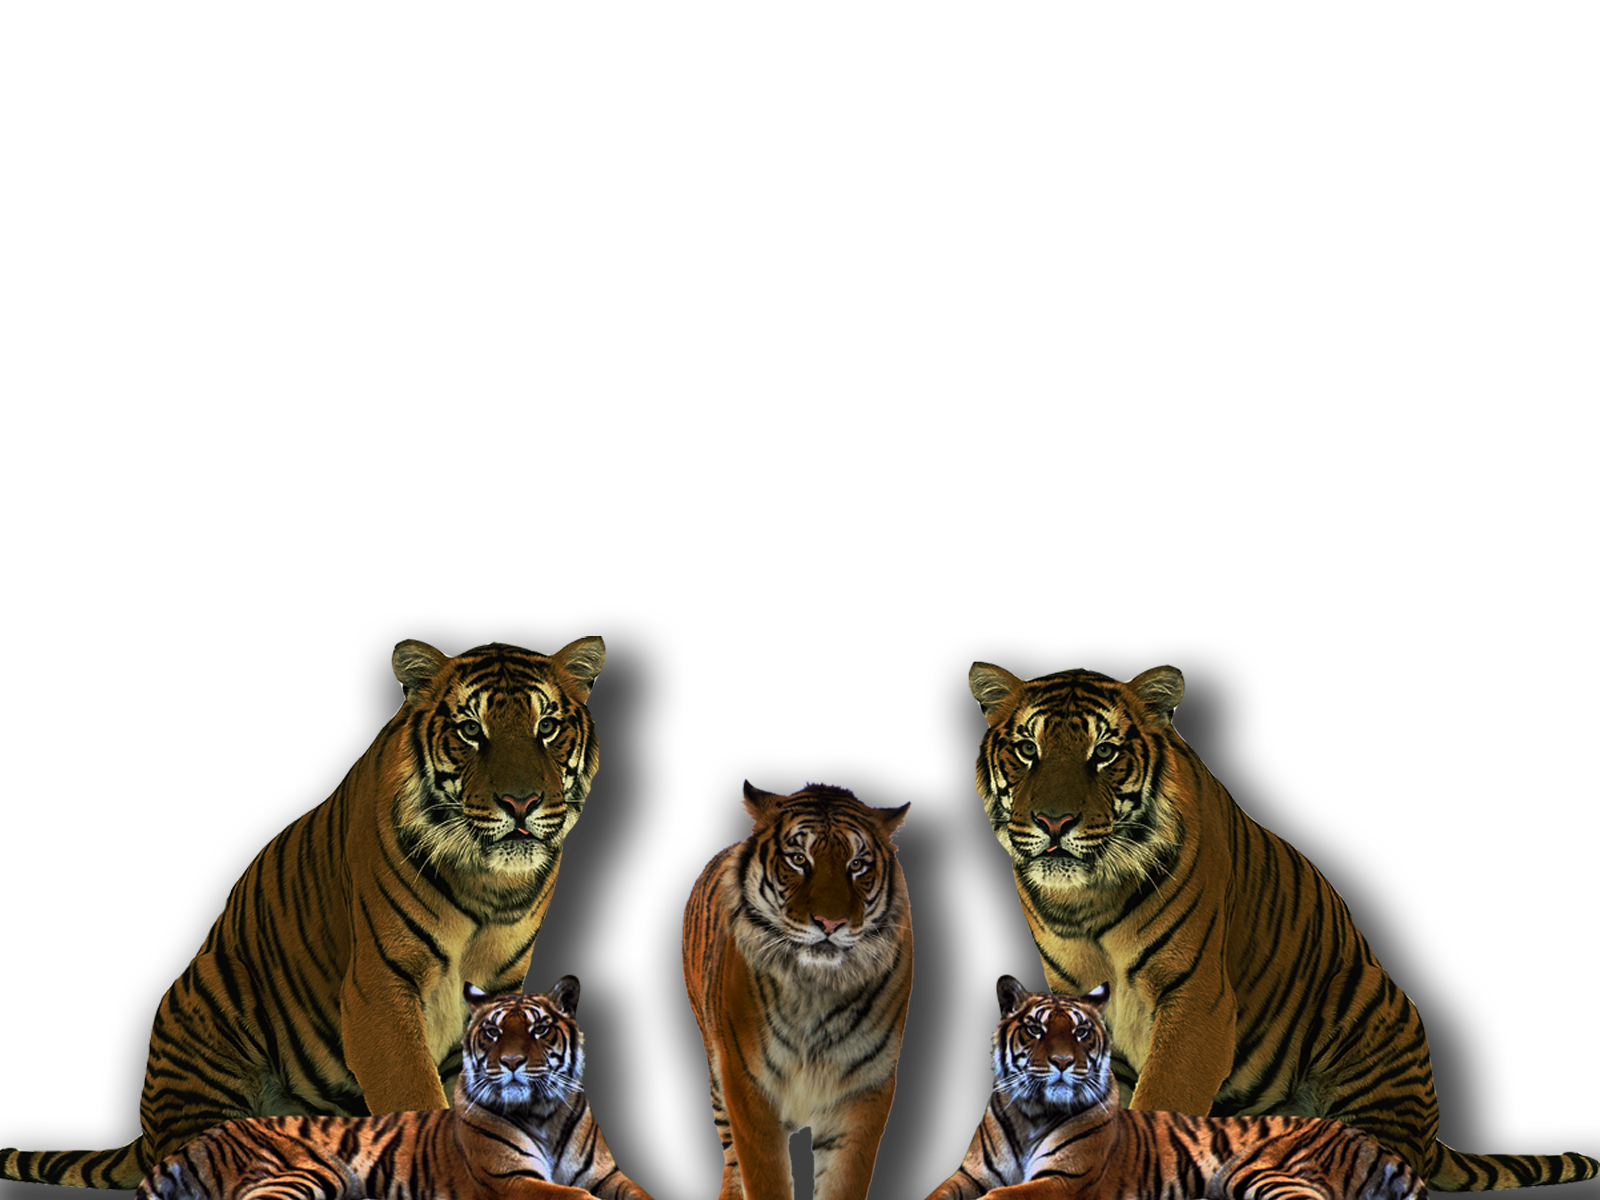 Free Download Tiger Pngpng 1600x1200 For Your Desktop Mobile Tablet Explore 74 Png Wallpapers Tumblr Png Wallpapers Galaxy Wallpaper Png Hd Wallpaper Png